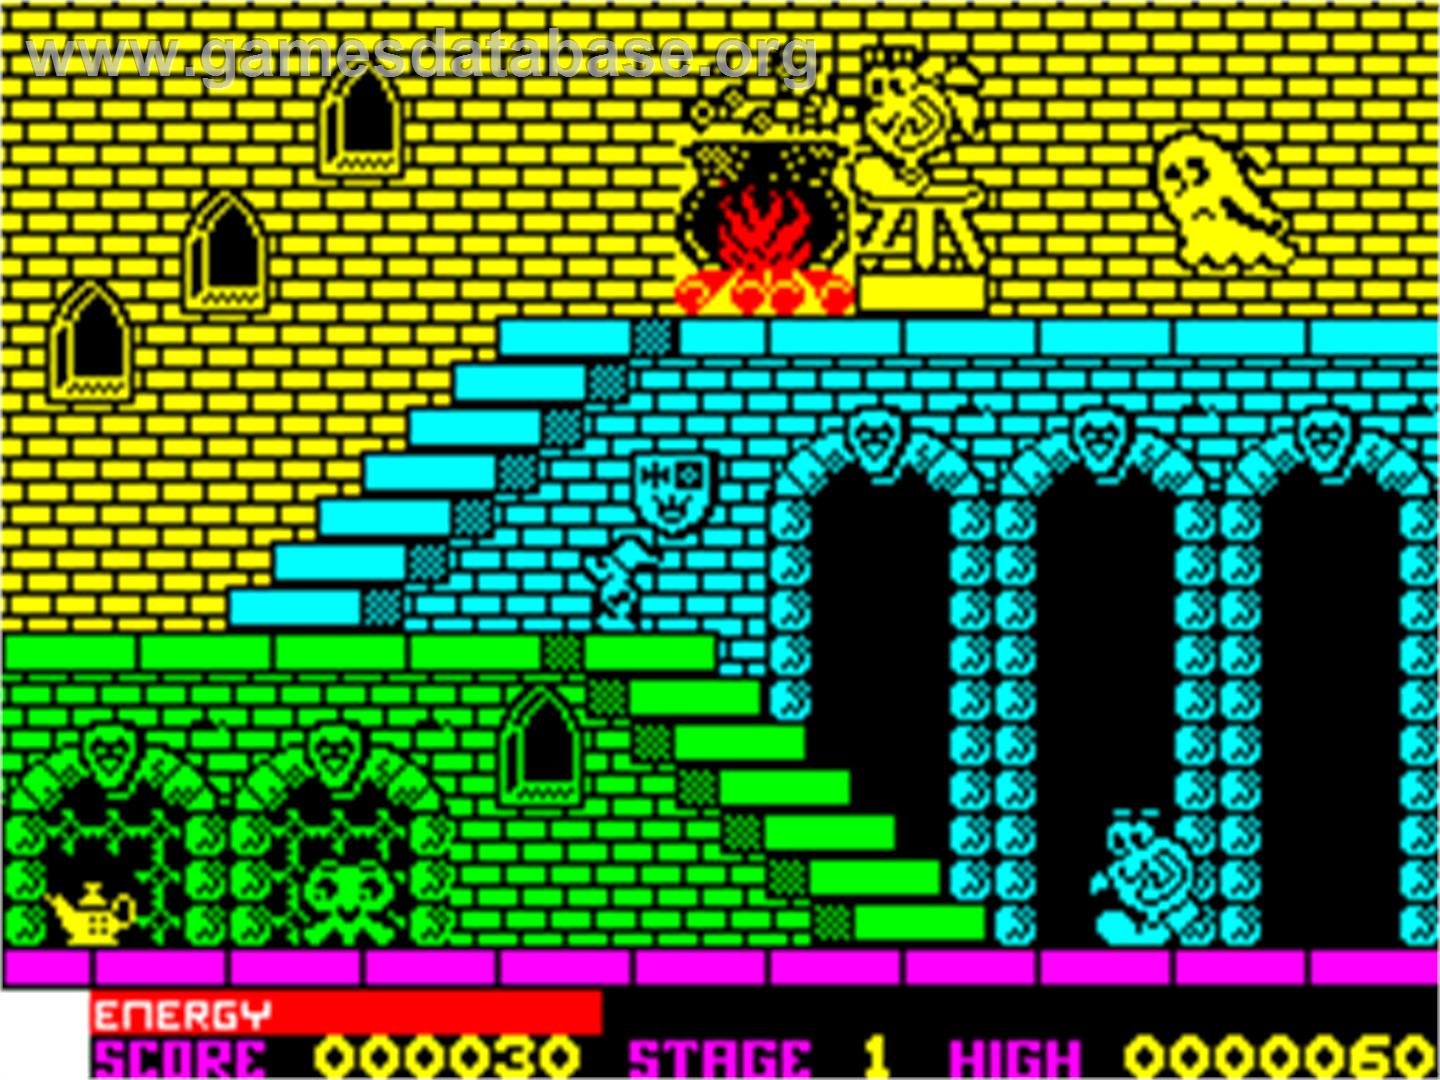 Olli & Lissa: The Ghost of Shilmore Castle - Sinclair ZX Spectrum - Artwork - In Game